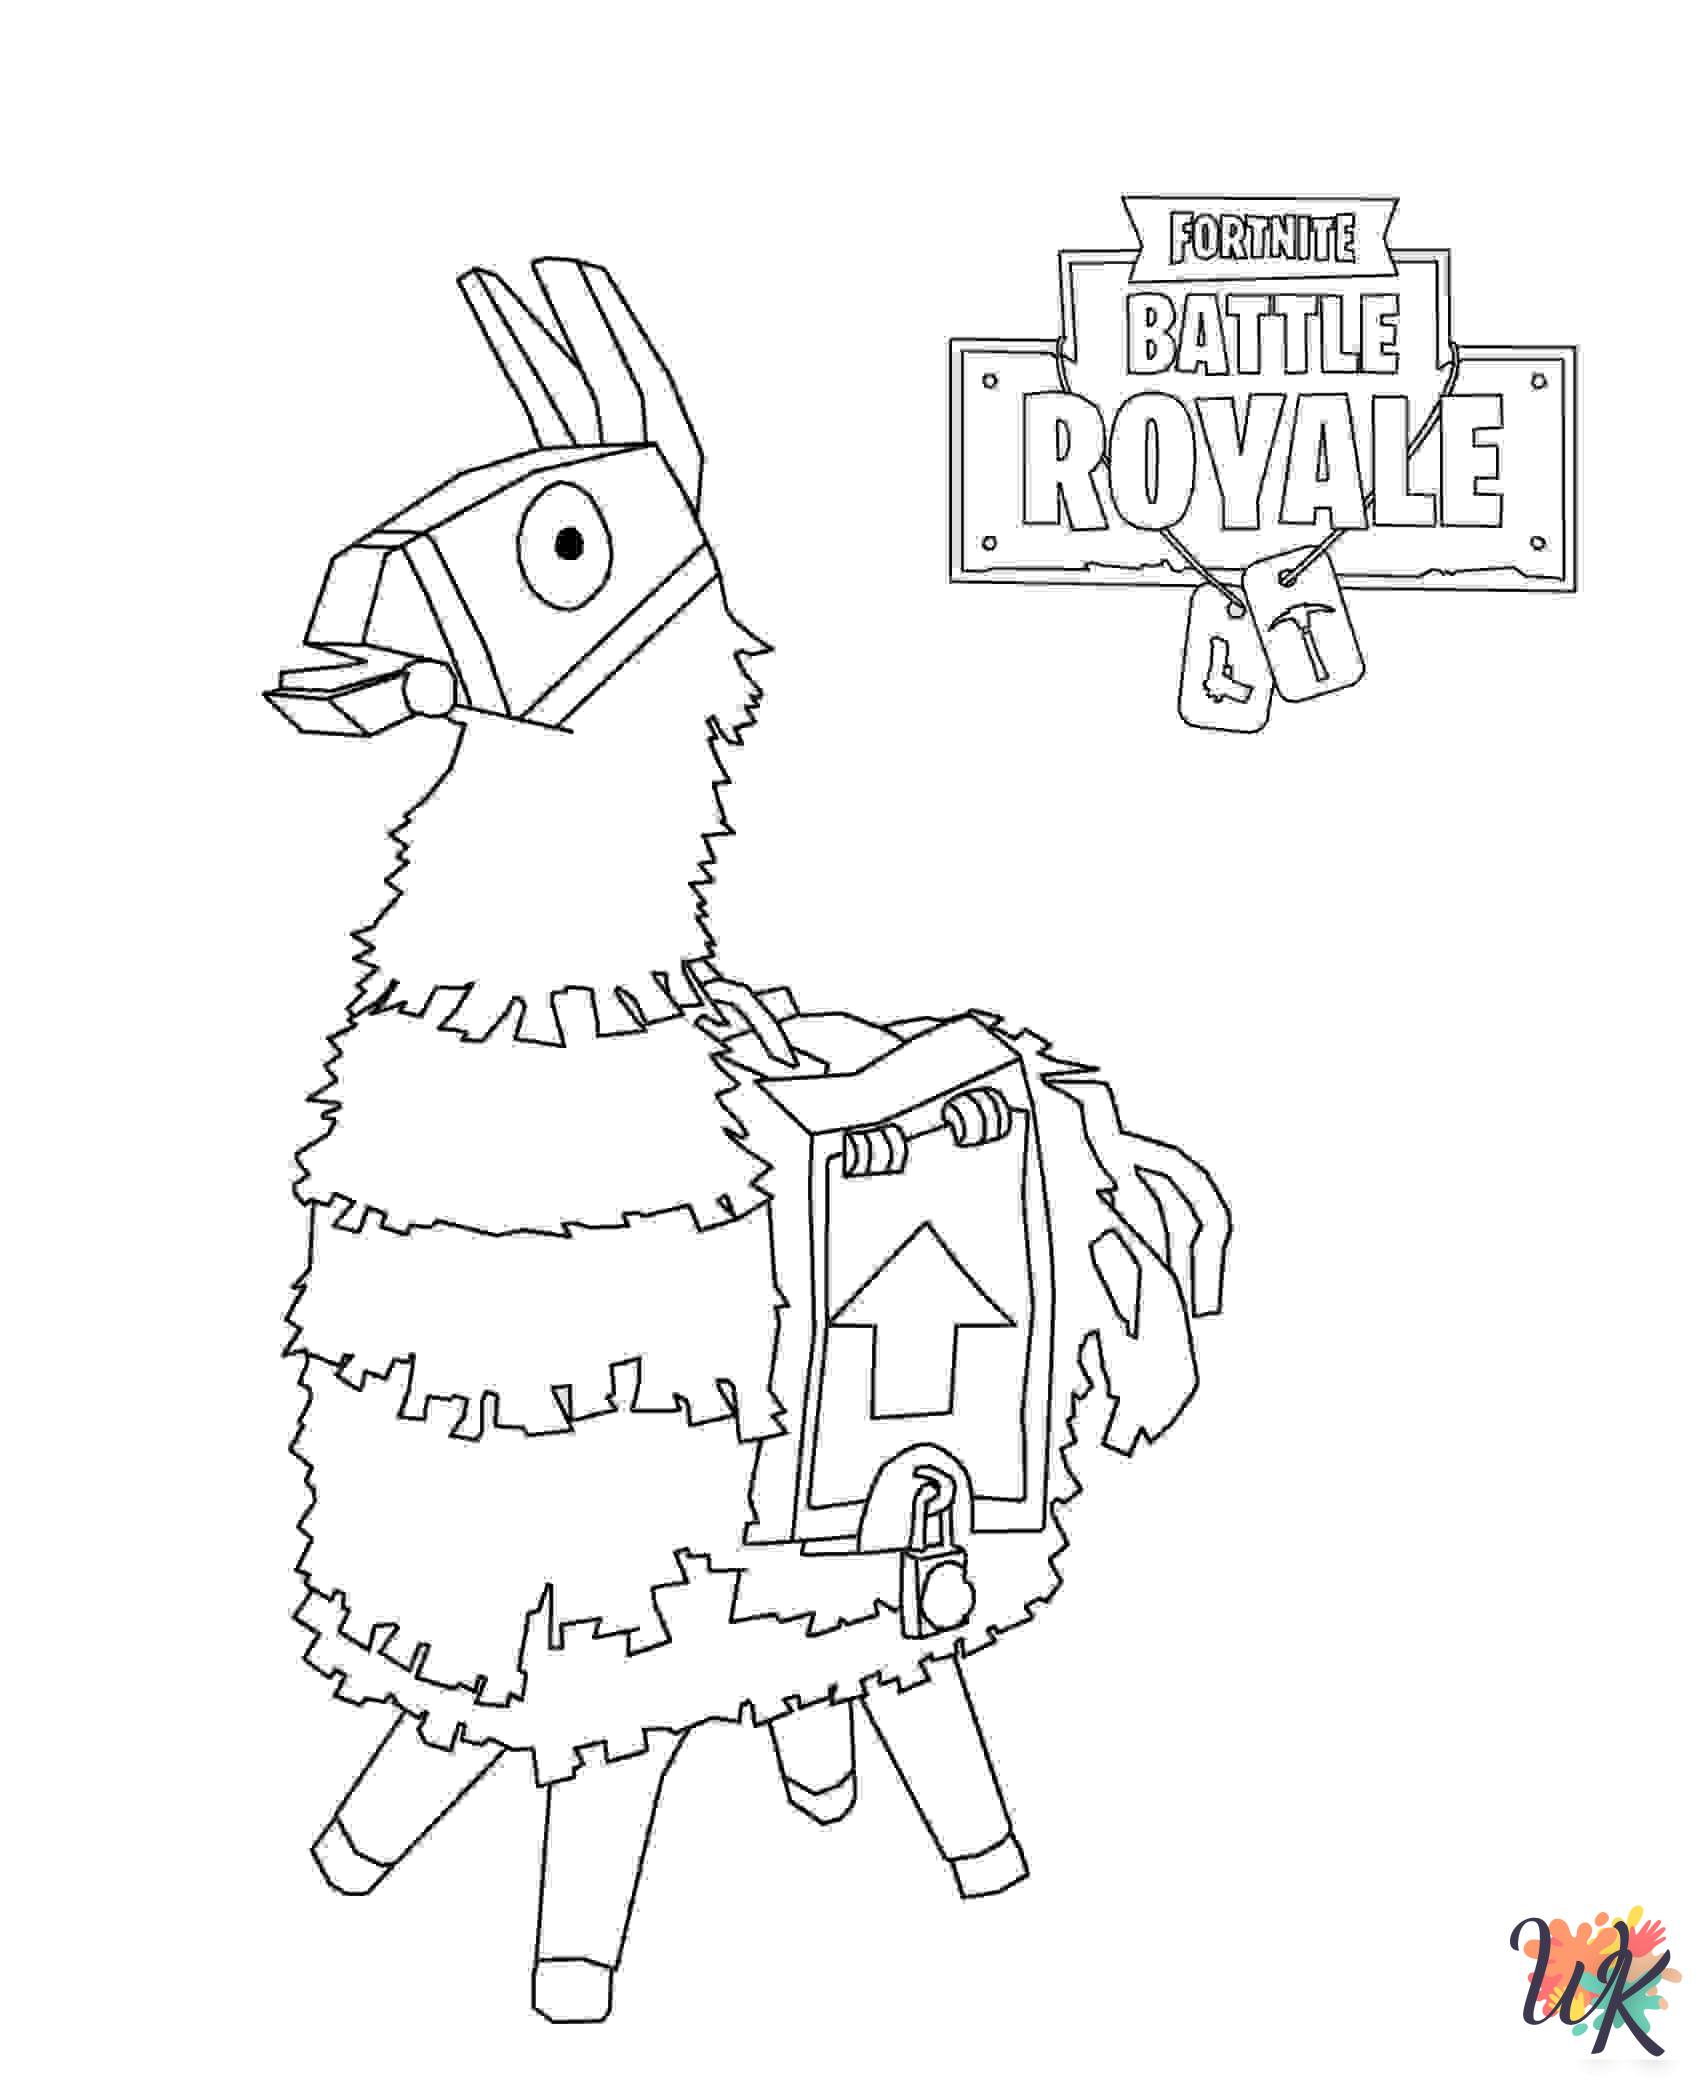 Fornite cards coloring pages